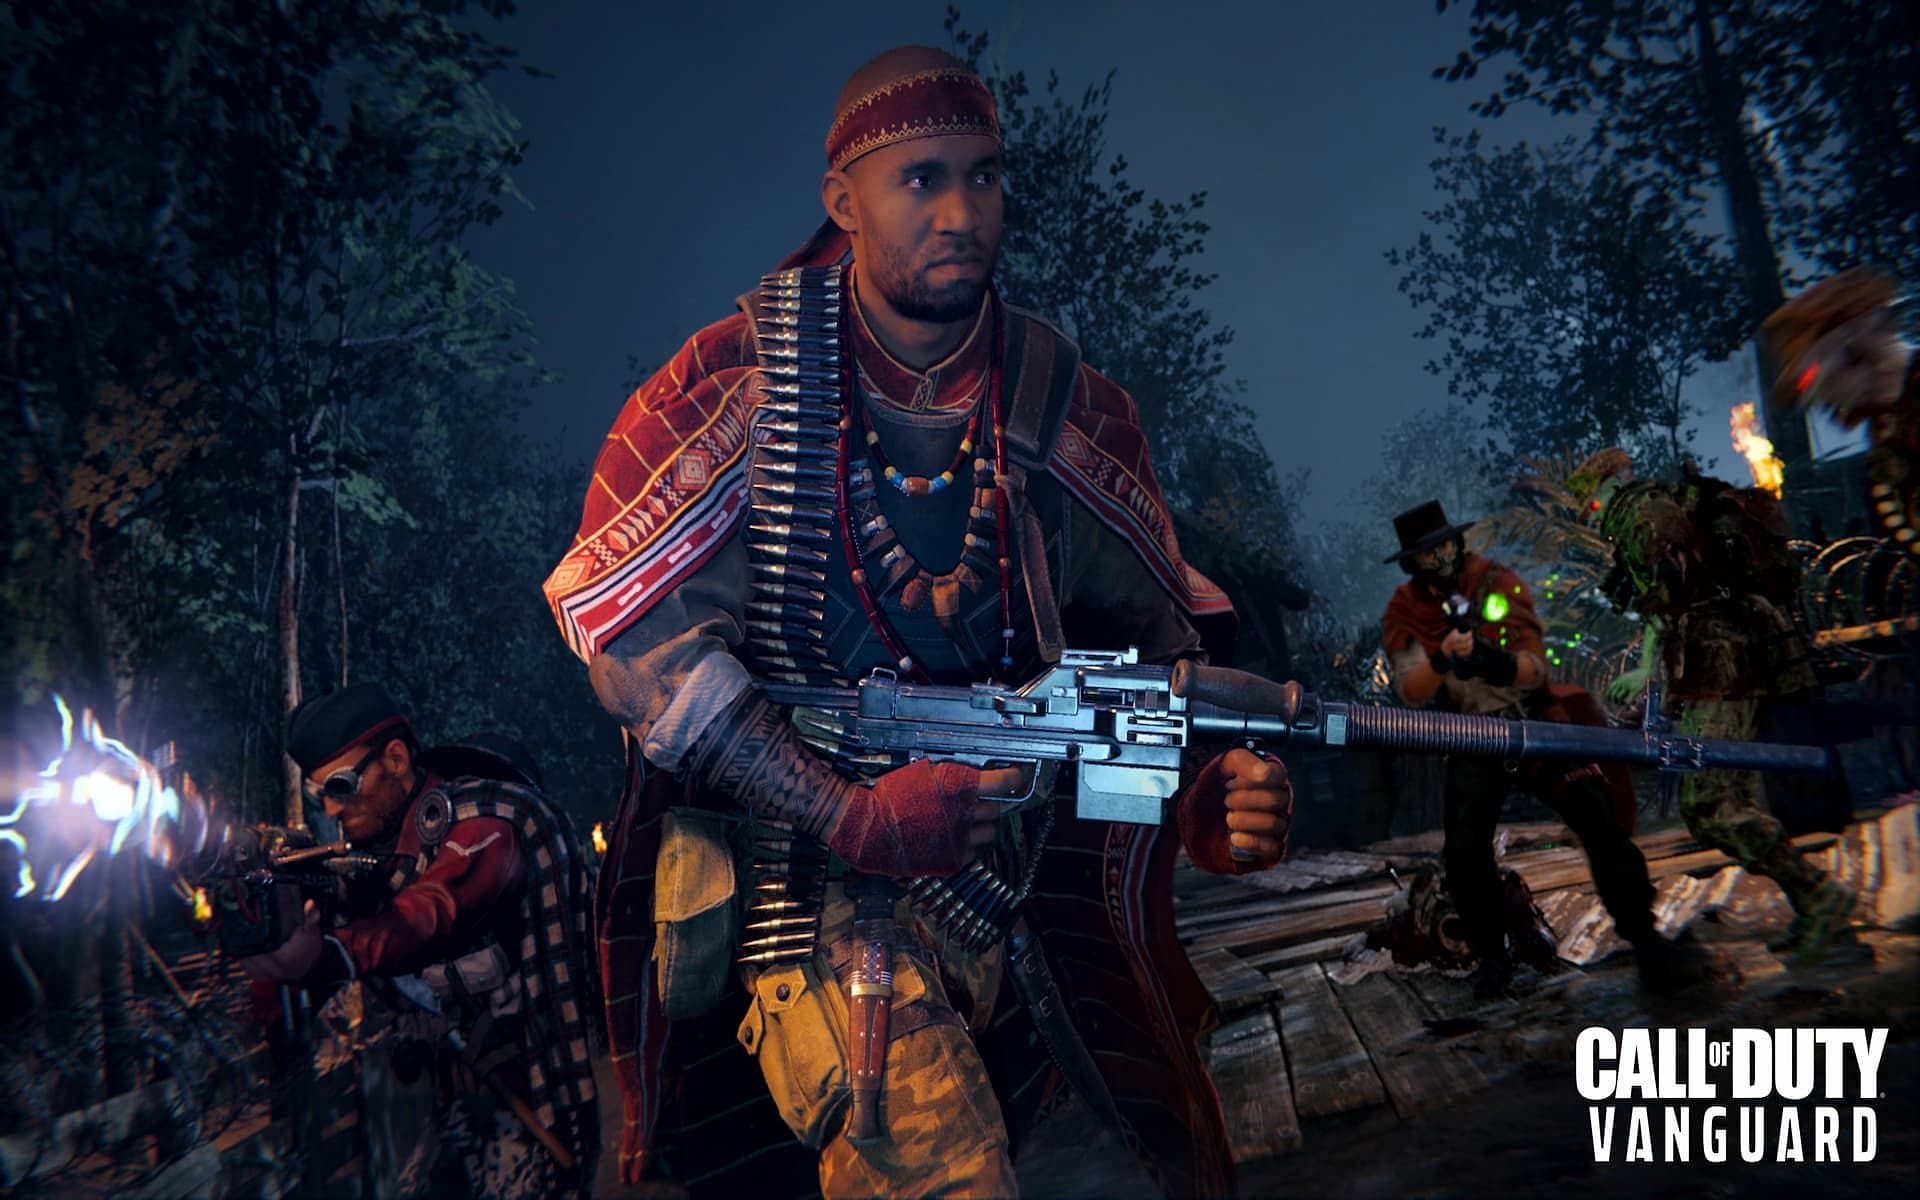 An Operator utilizes the new UGM-8 LMG in Call of Duty: Vanguard (Image via Activision)